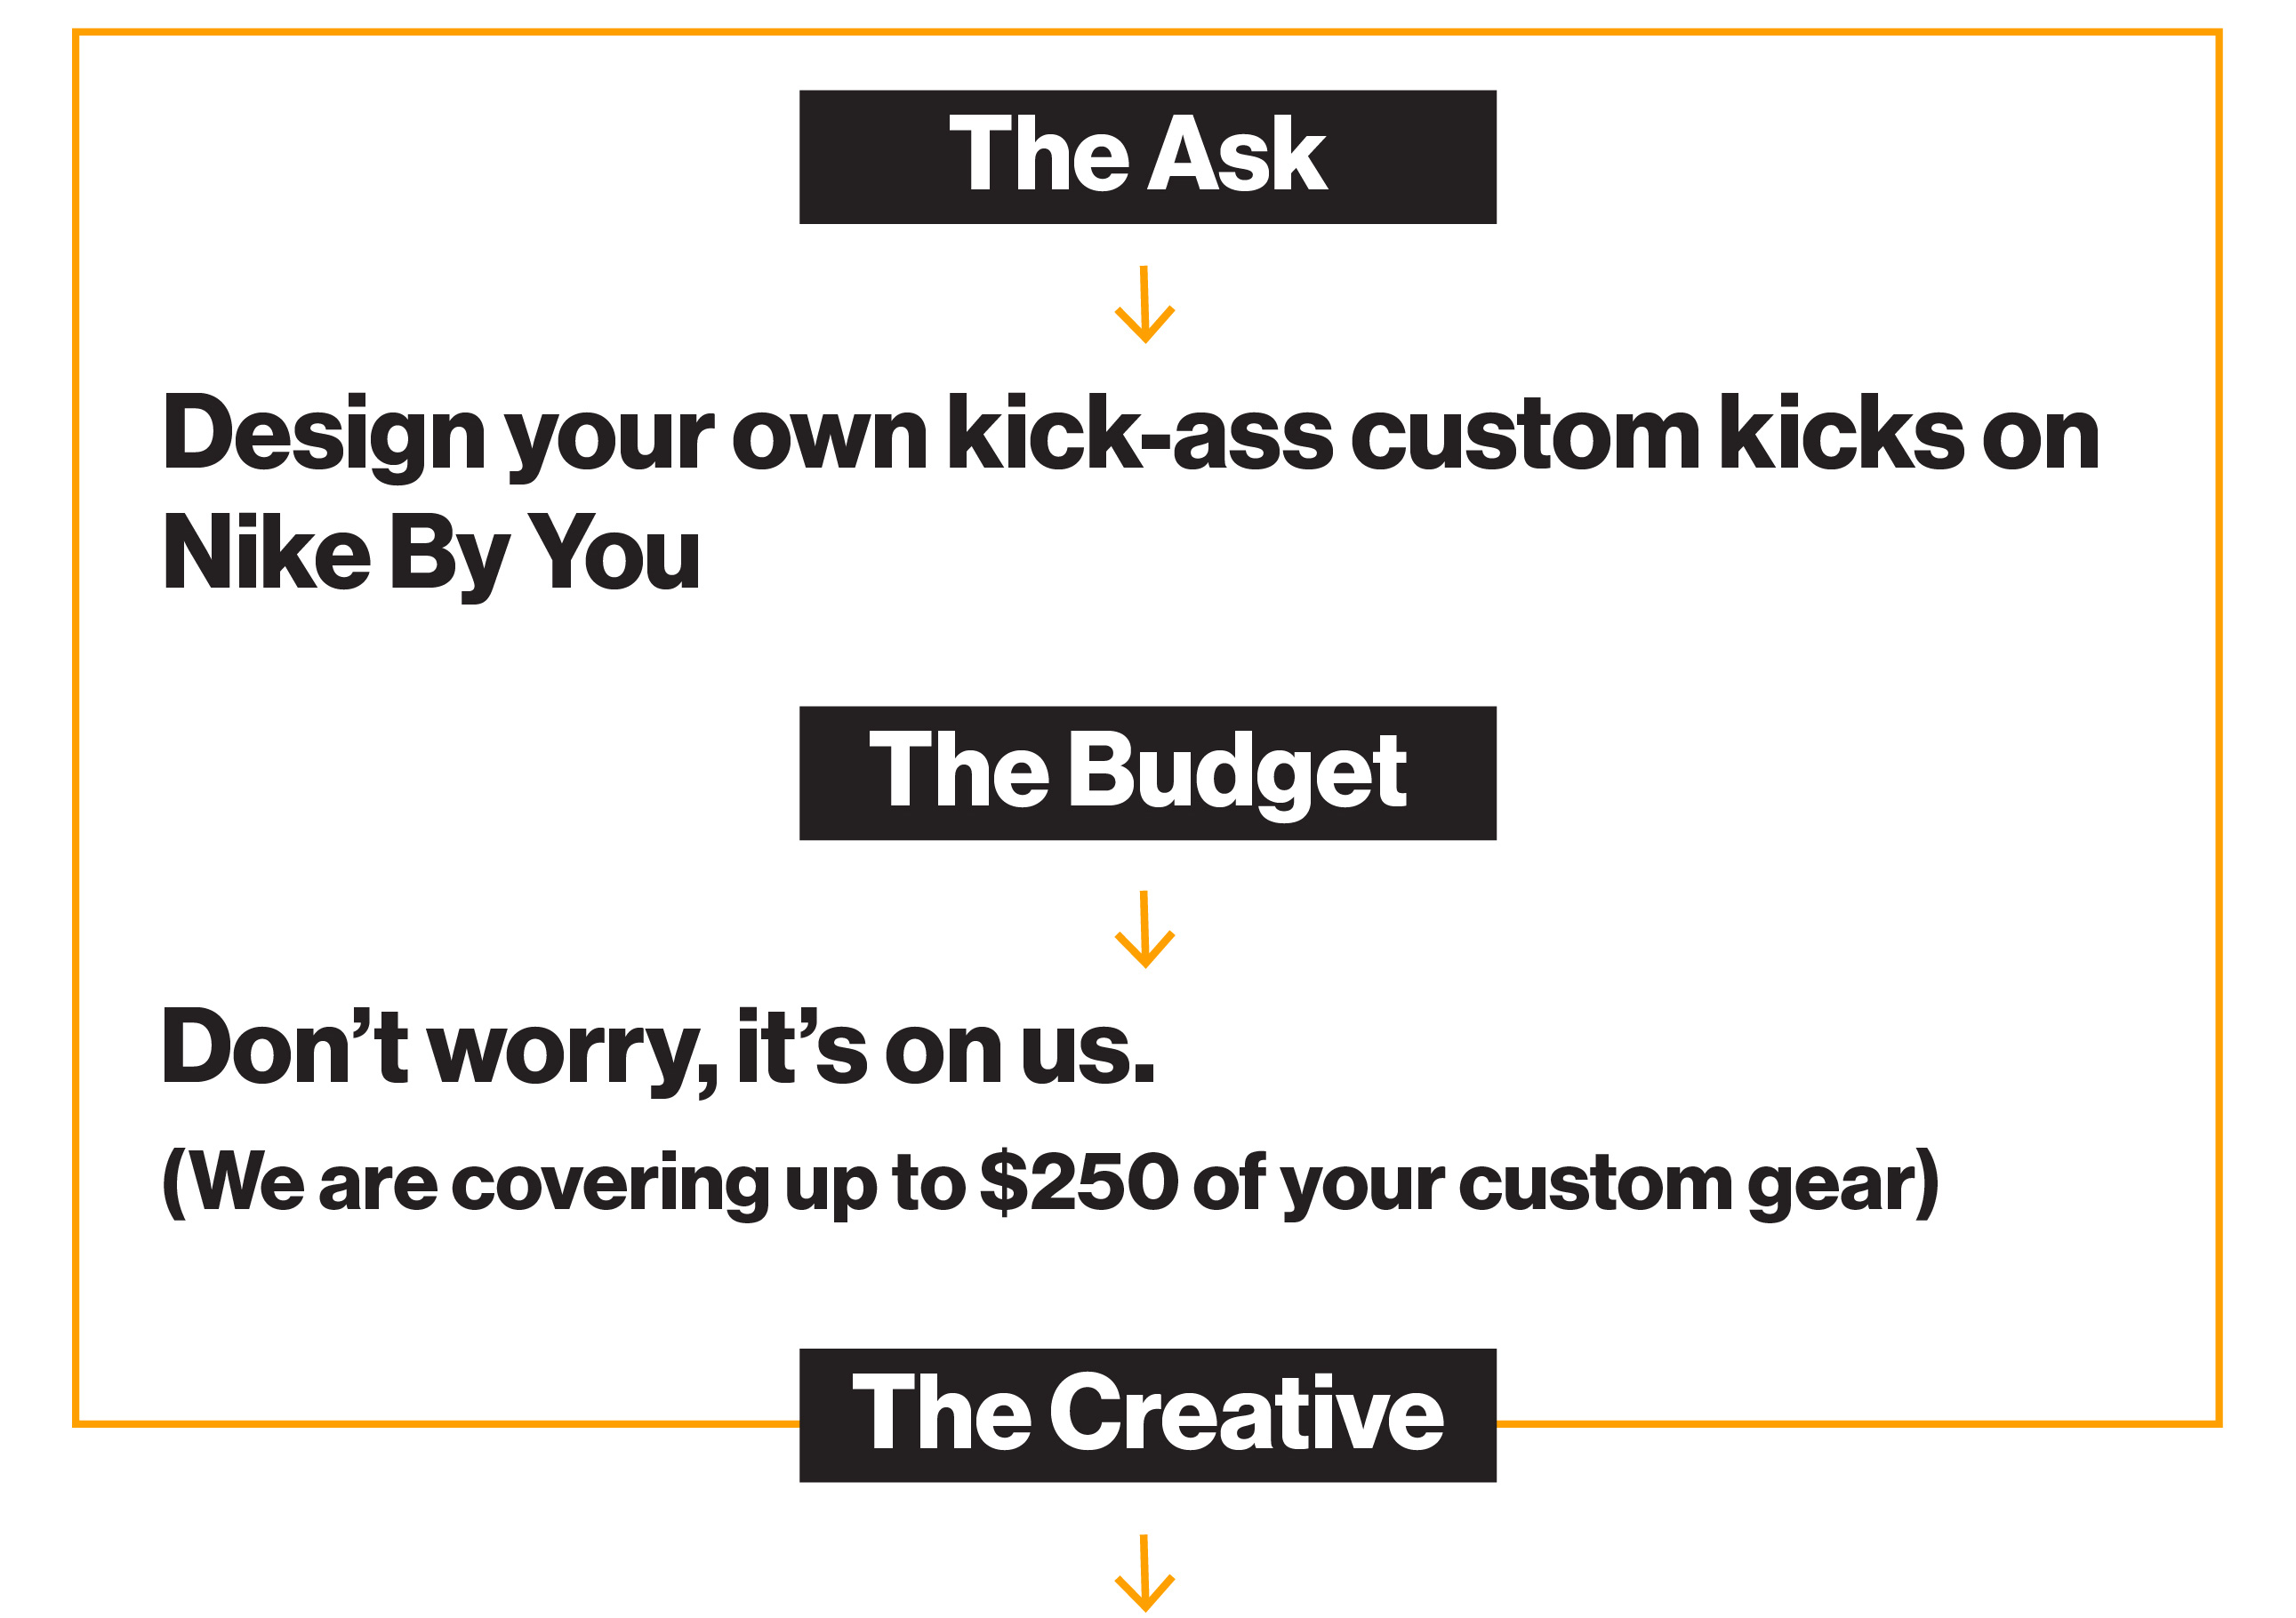 The Ask: Design your own kick-ass custom kicks on Nike By You. The Budget: Don't worry about it, it's on us. (we are covering upt to $250 of your custom gear)